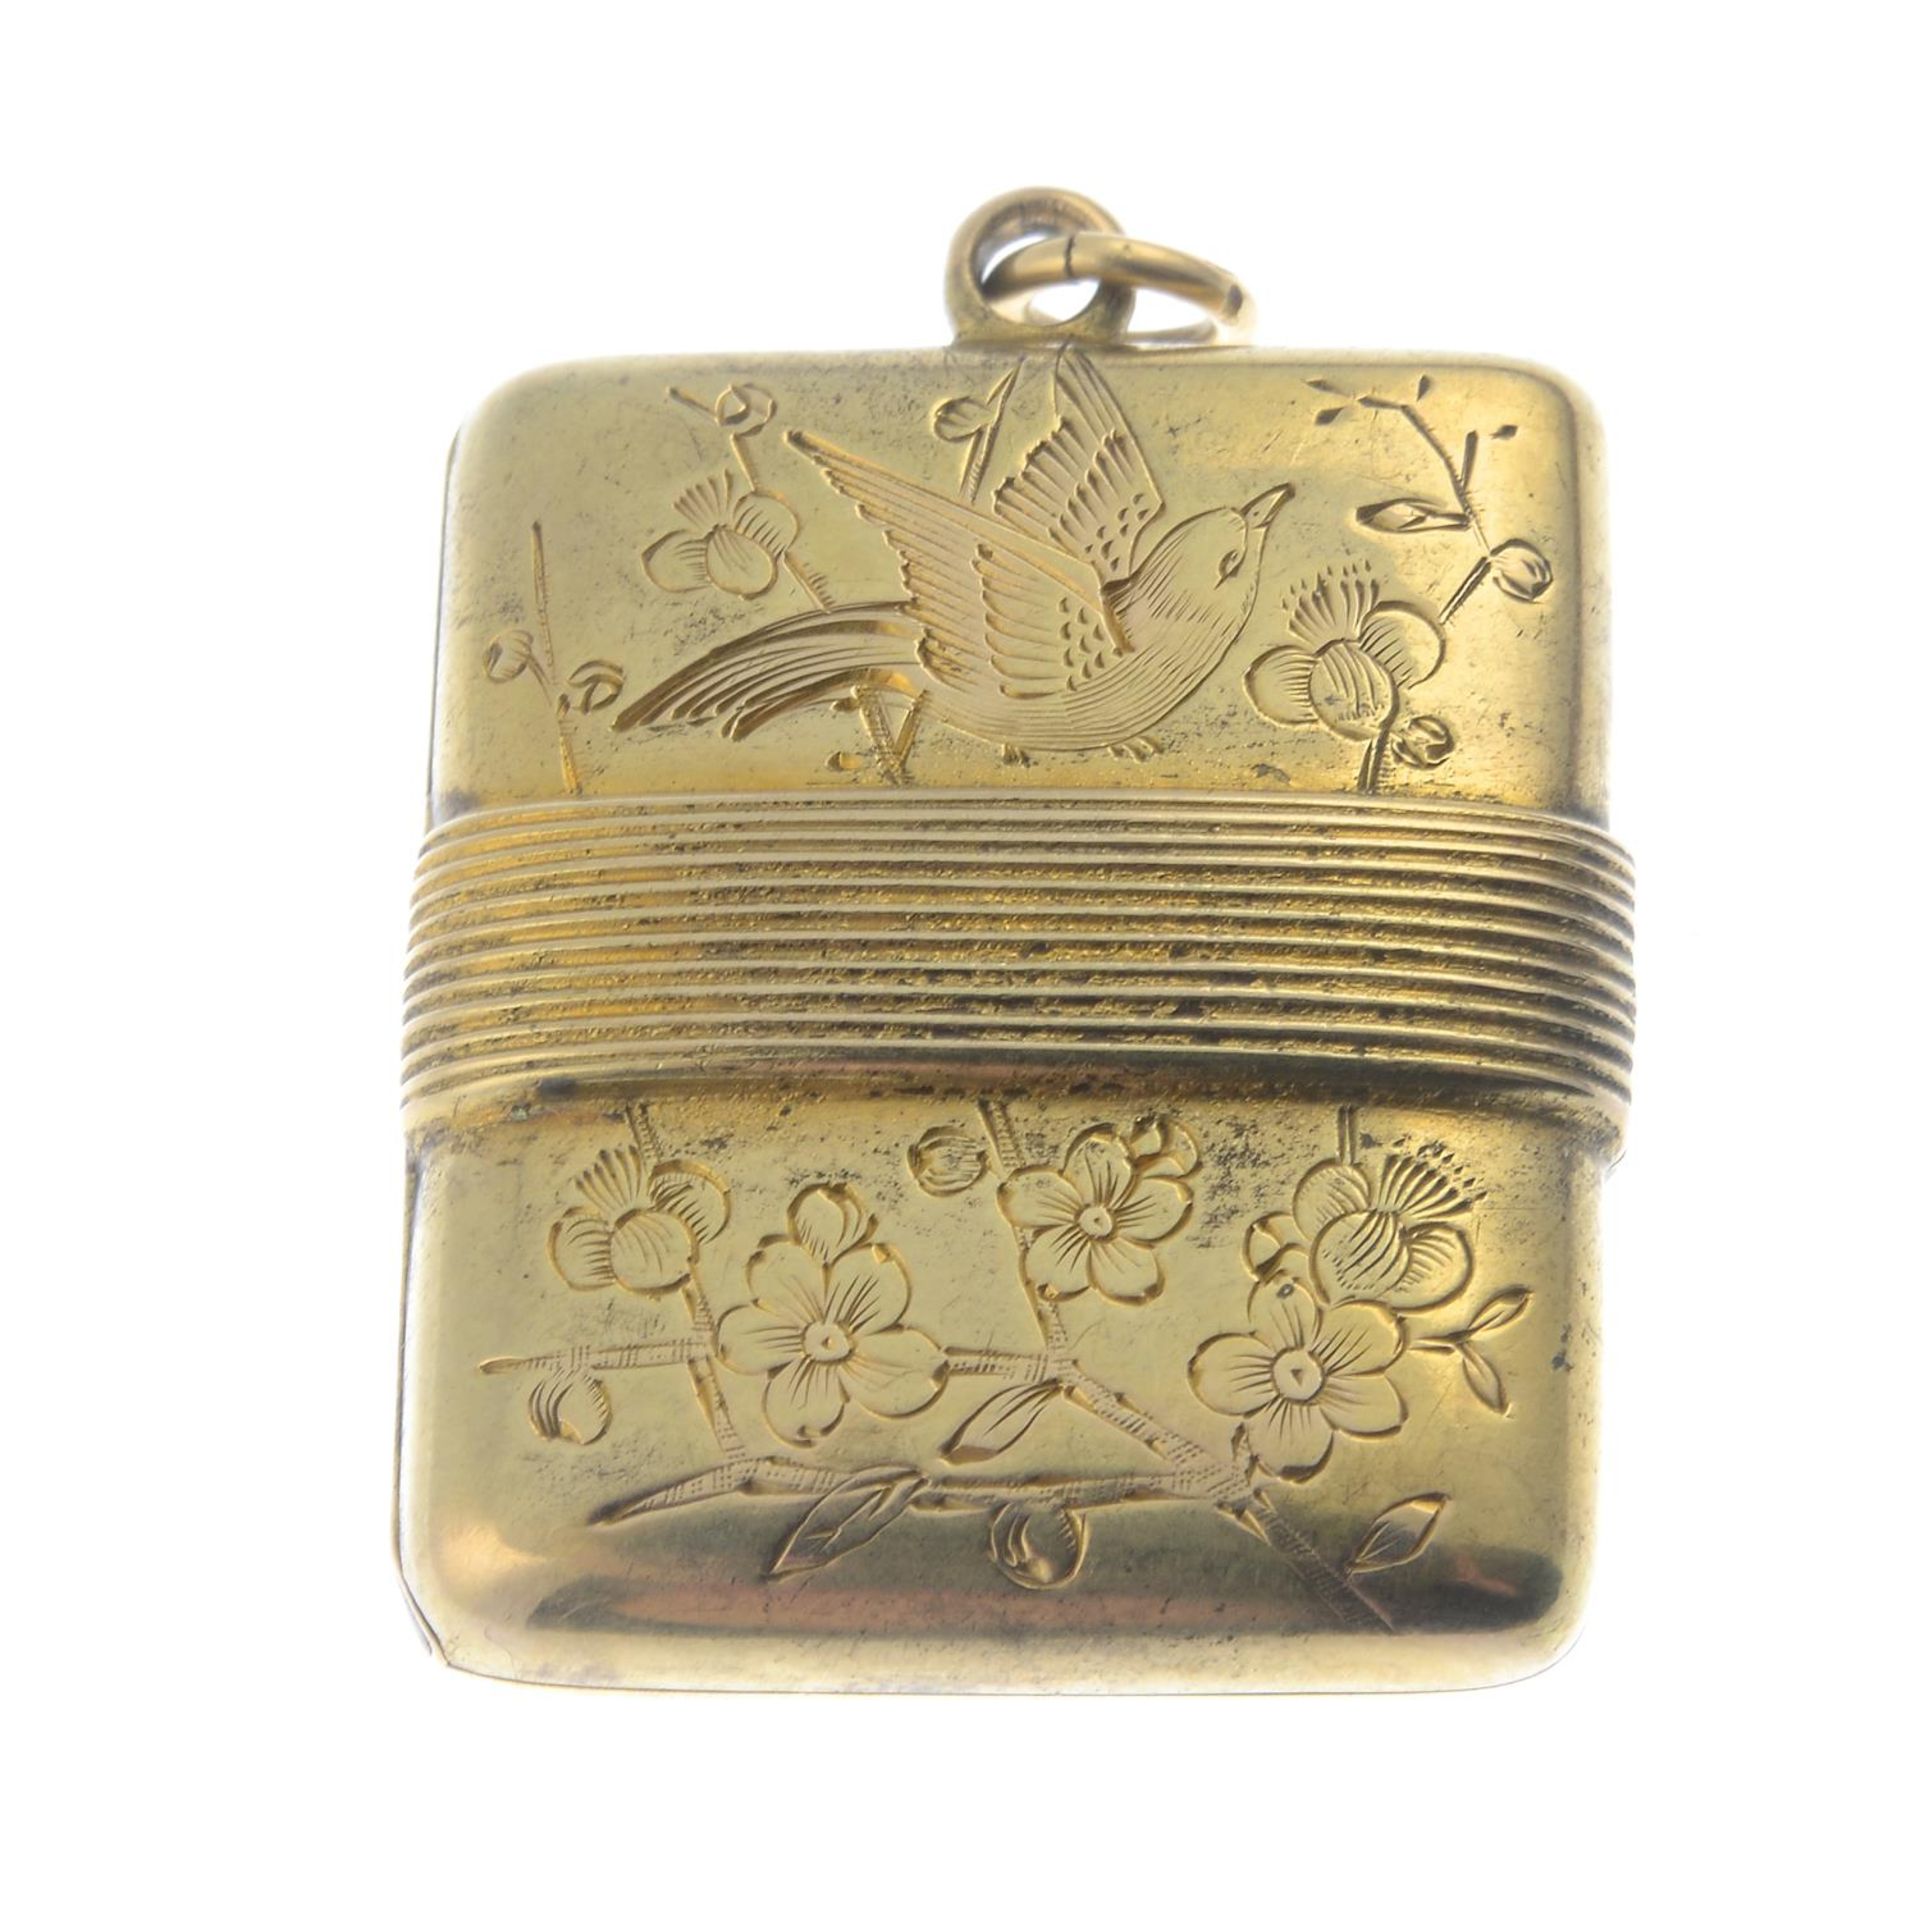 An early 20th century locket, with floral and bird motif.Length 3.4cms. - Image 2 of 2